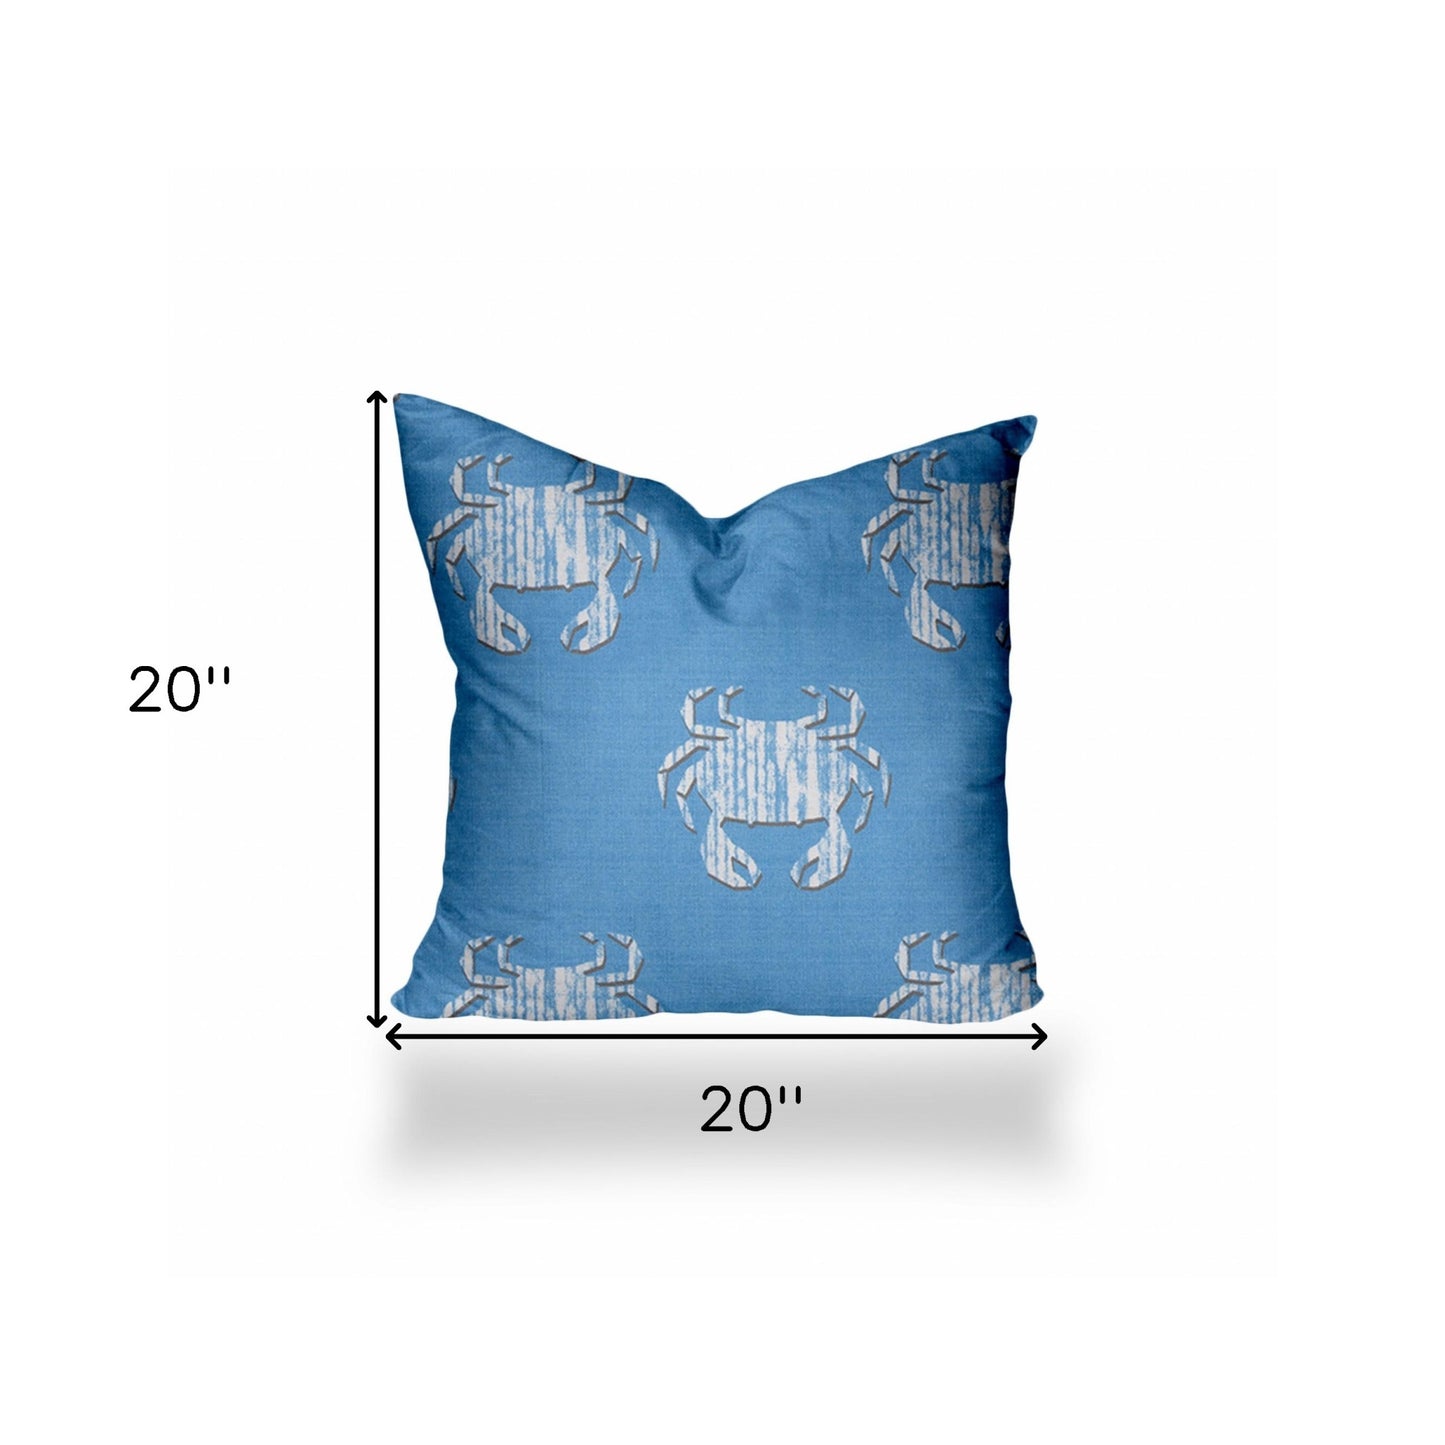 20" X 20" Blue And White Crab Enveloped Coastal Throw Indoor Outdoor Pillow Cover